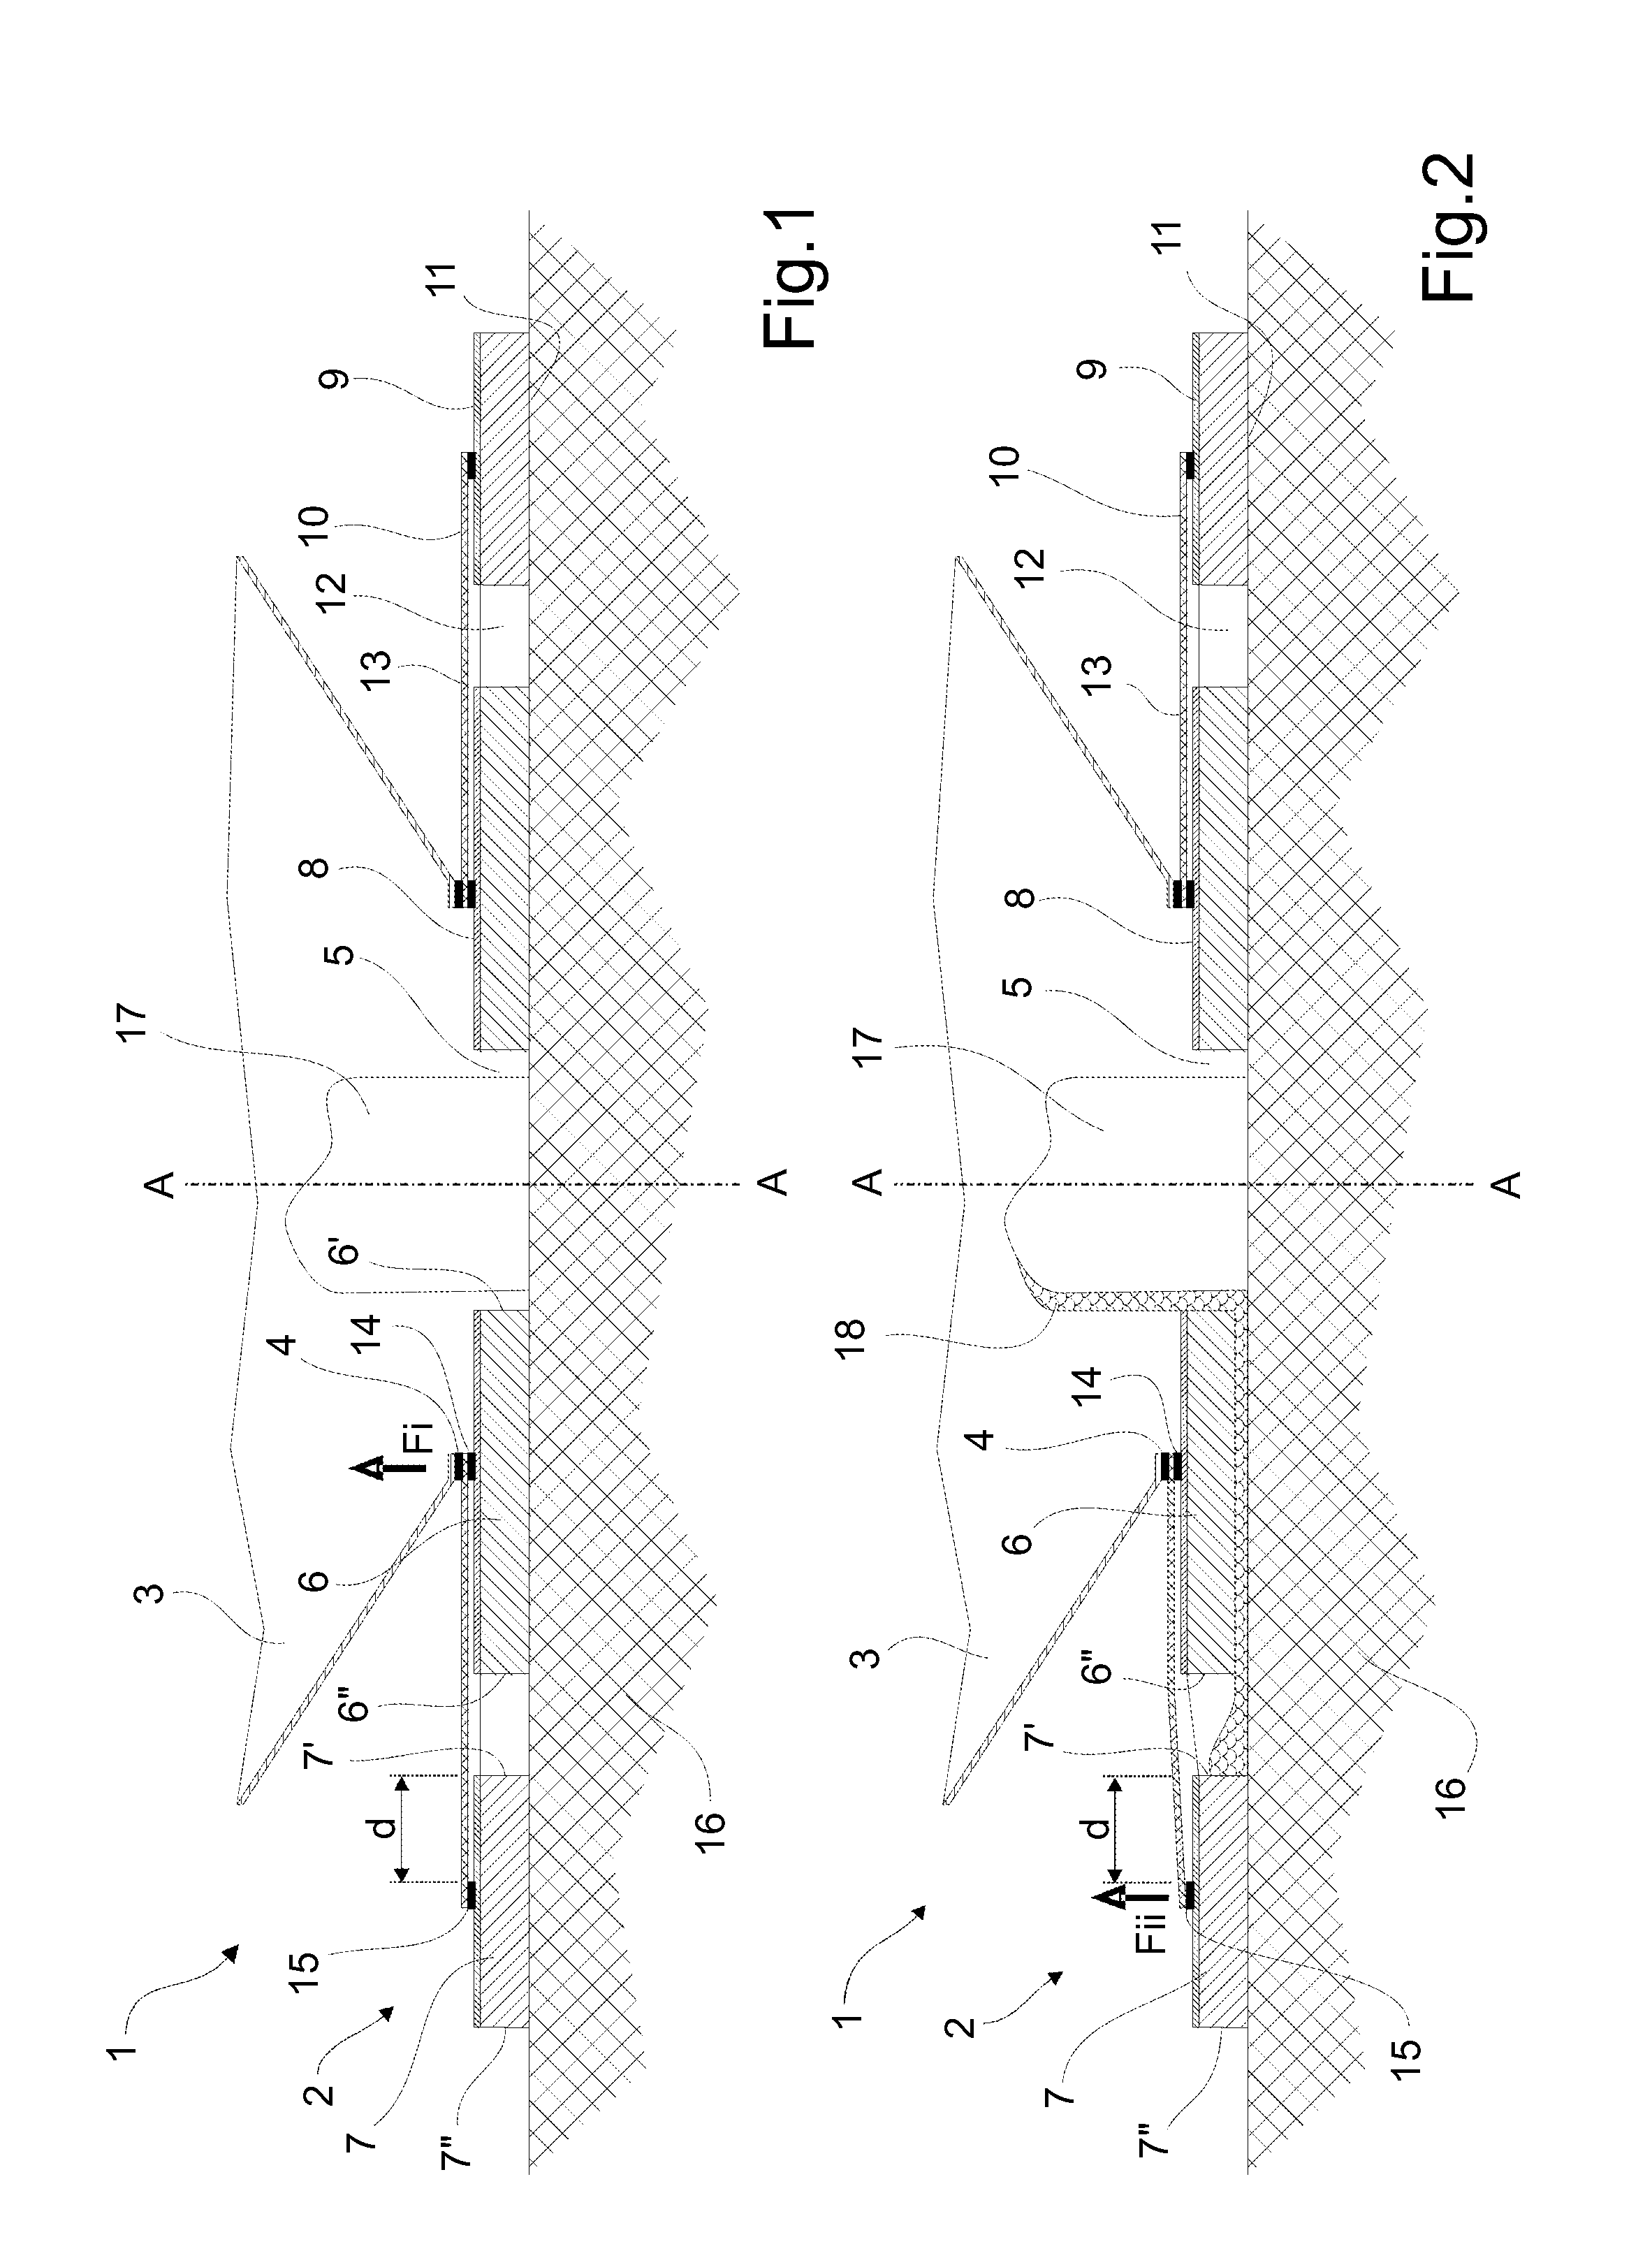 Adhesive wafer for use in a collecting device